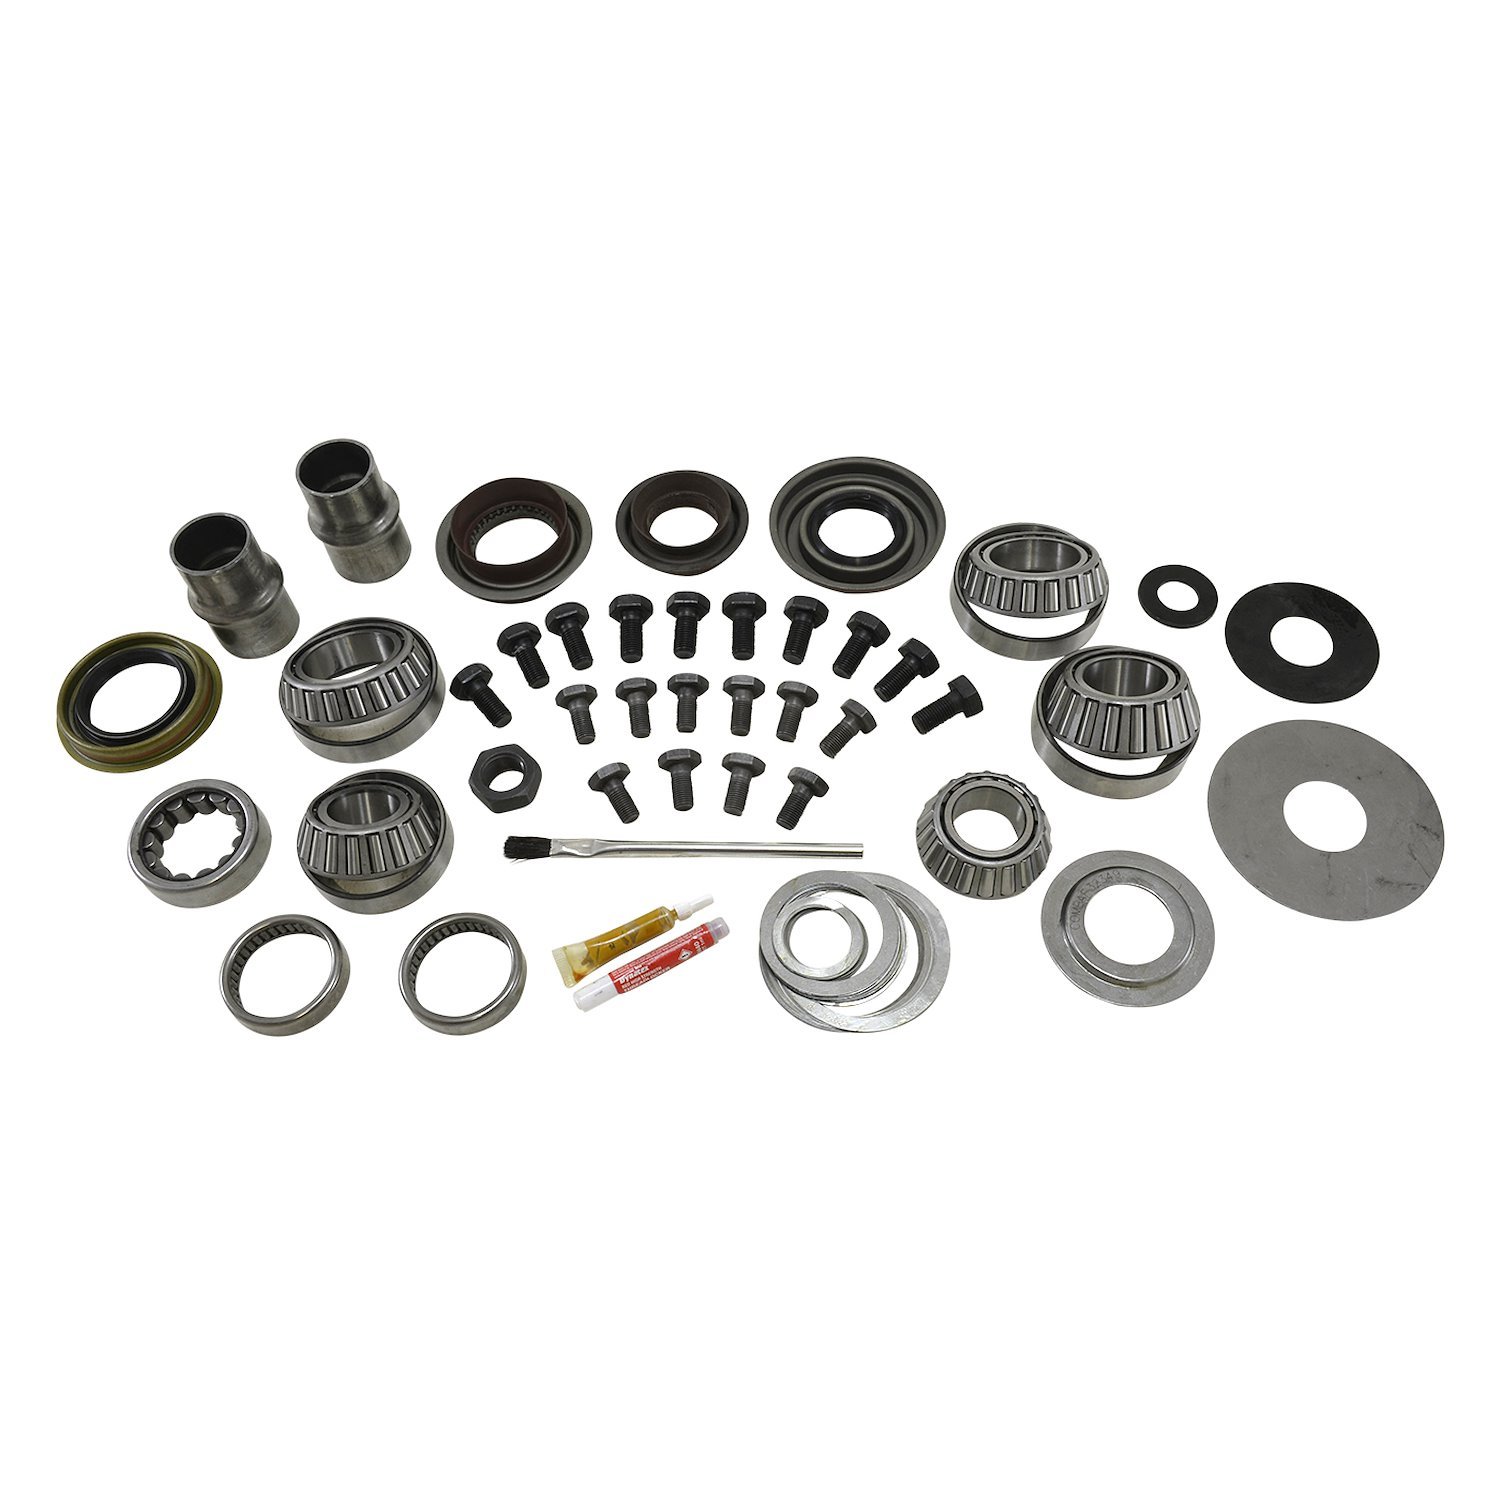 Master Overhaul Kit For Dana  in.Super in. 30 Differential, '06-'10 Ford Front